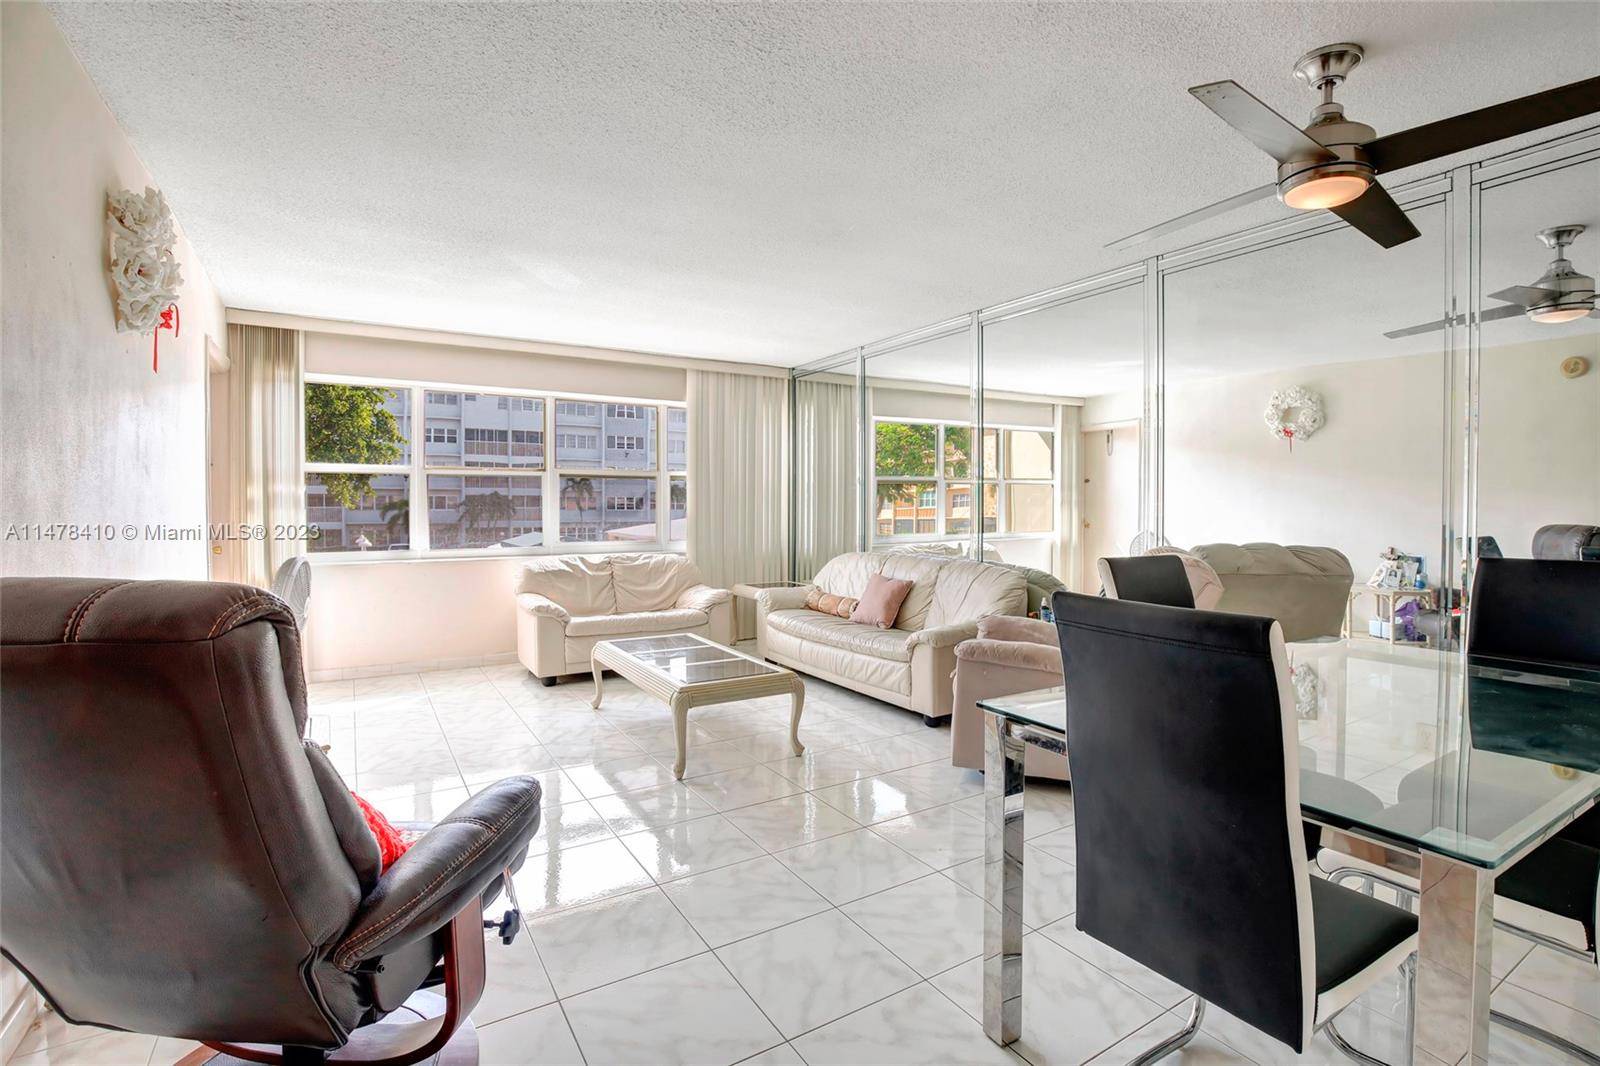 Discover this spacious and comfortable condo in the heart of vibrant Hallandale Beach.